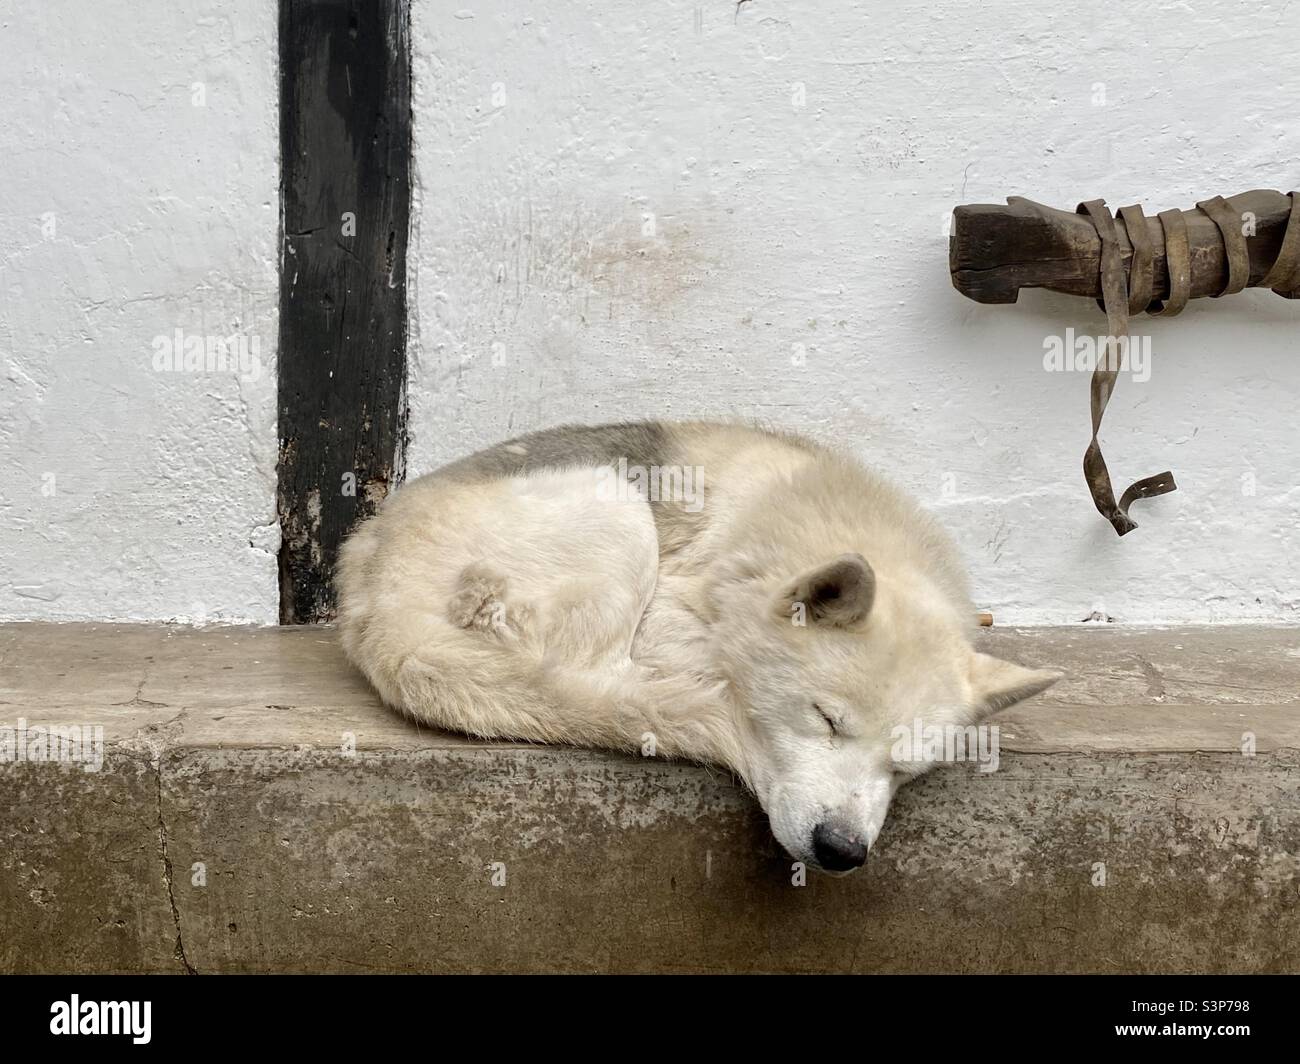 Let sleeping dogs lie. Stock Photo